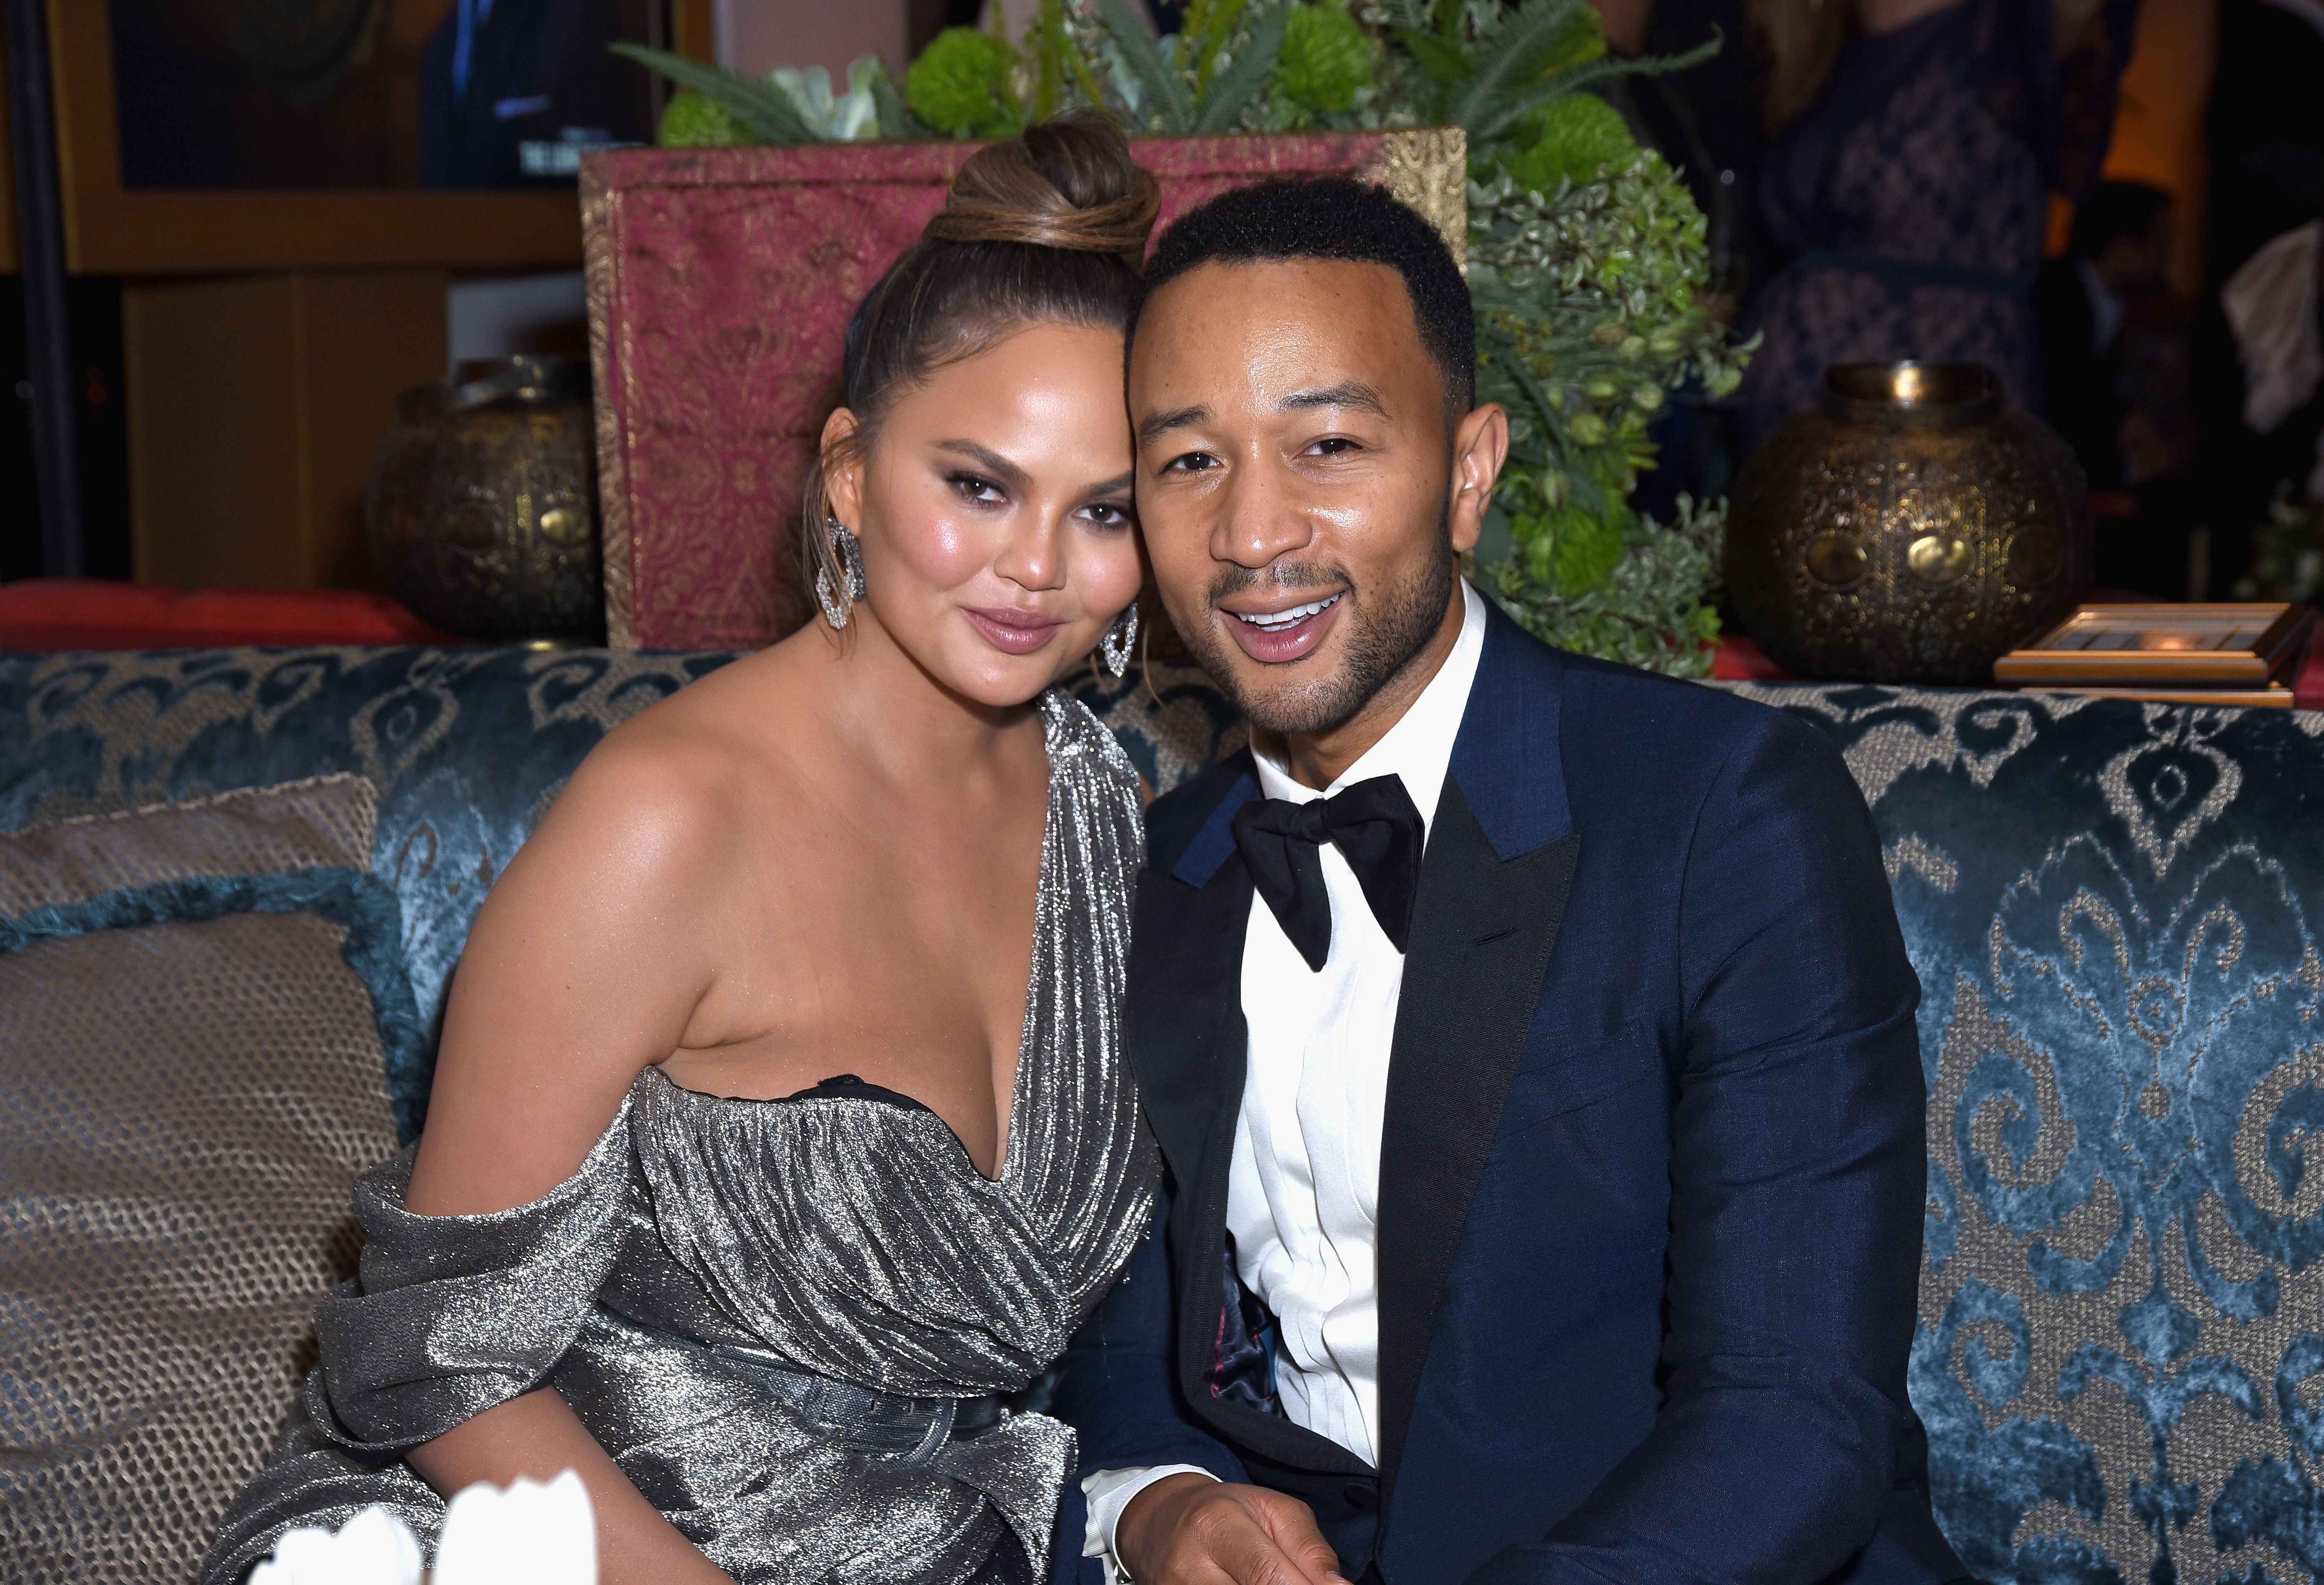 Model Chrissy Teigen and her husband and singer John Legend at Hulu's Emmy Party at the Nomad Hotel Los Angeles in California | Photo: Presley Ann/Getty Images